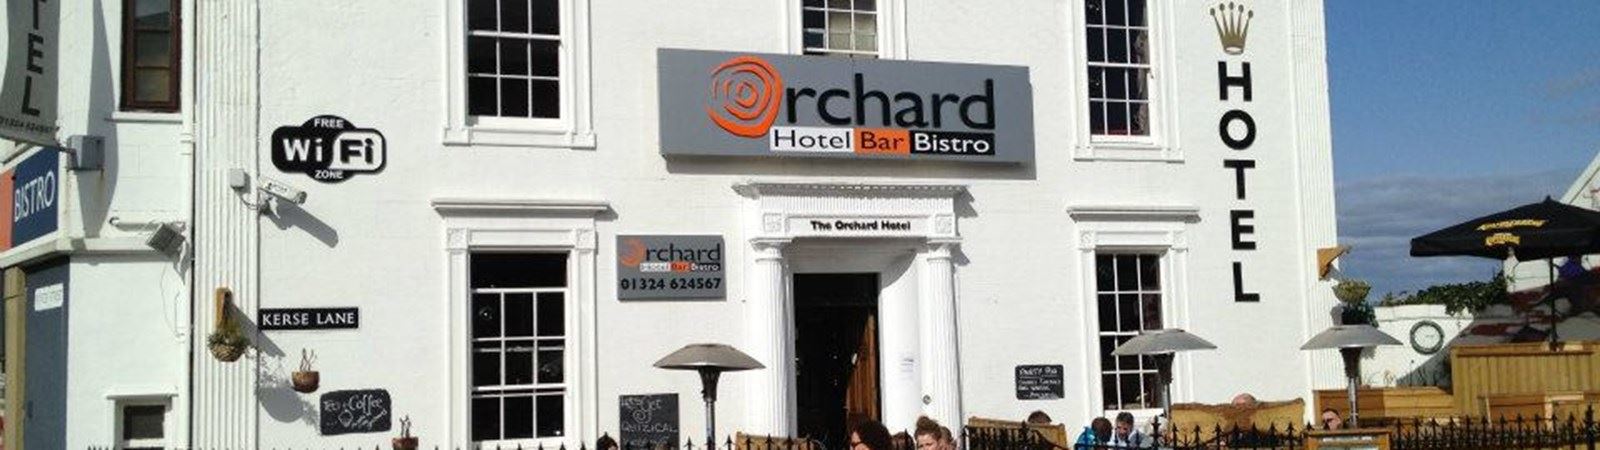 The Orchard Hotel Falkirk|Hotels in Falkirk